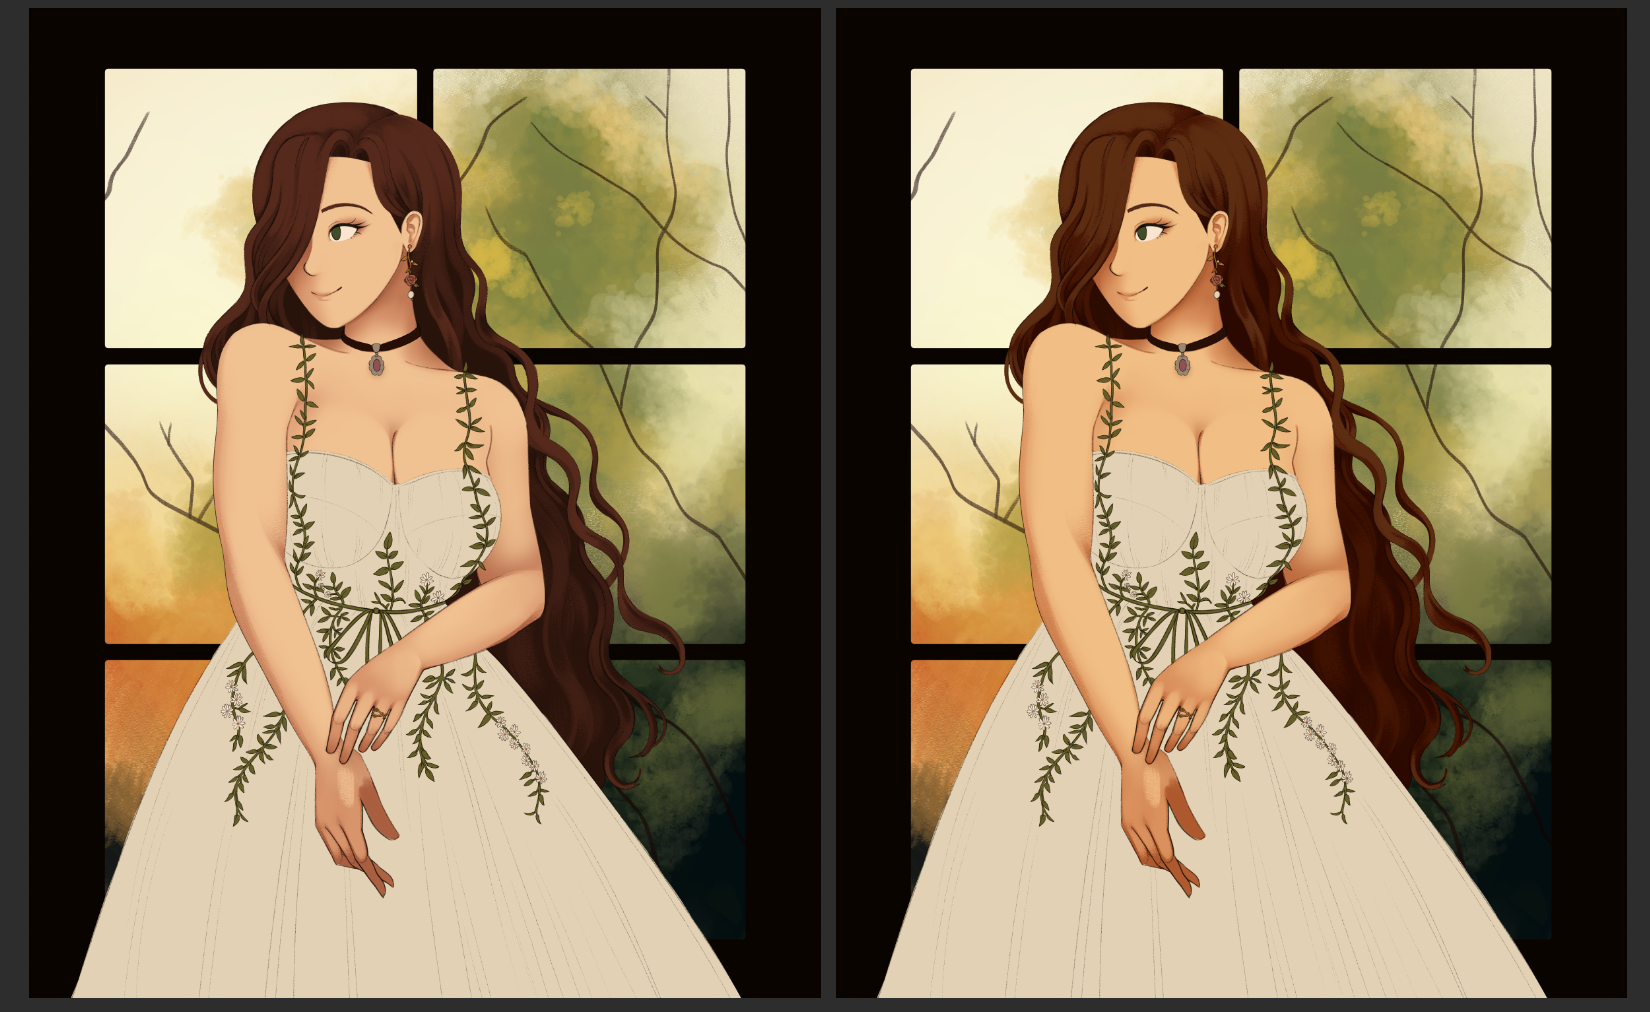 two color tests. the one on the right has slightly warmer colors than the left image